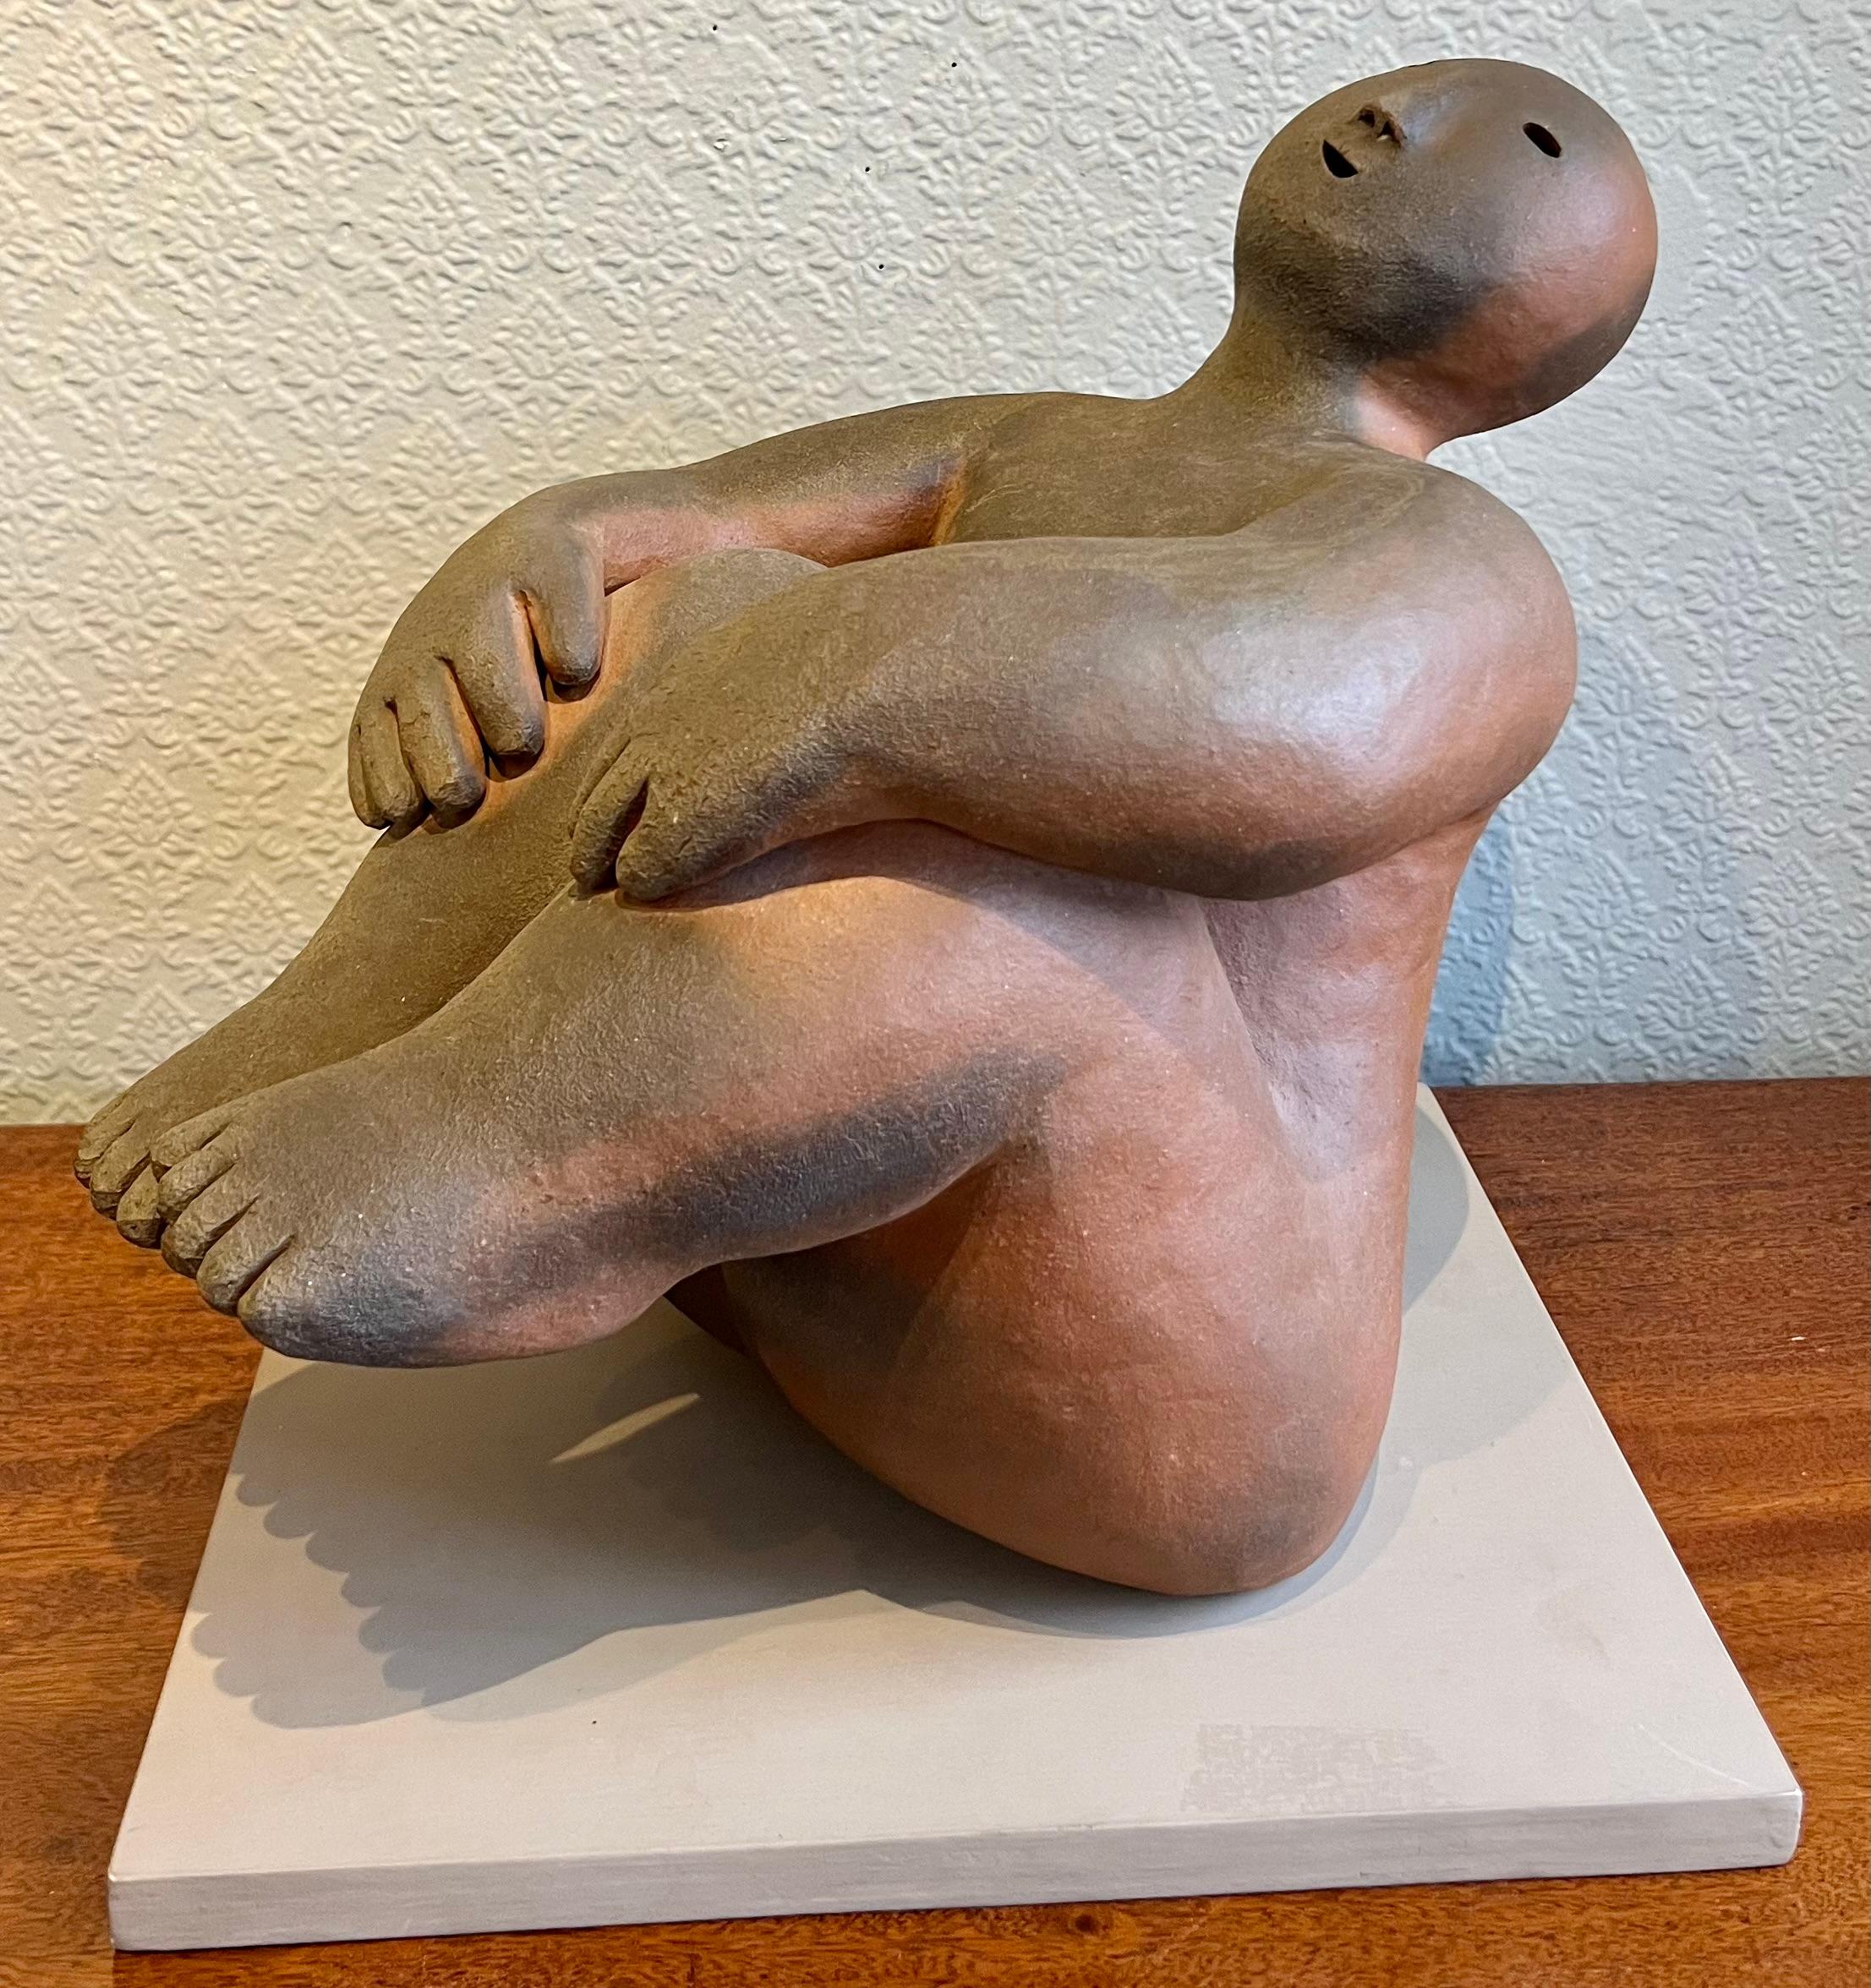 Wood fired ceramic sculpture on wooden plinth stand.  Joy Brown on her work: 